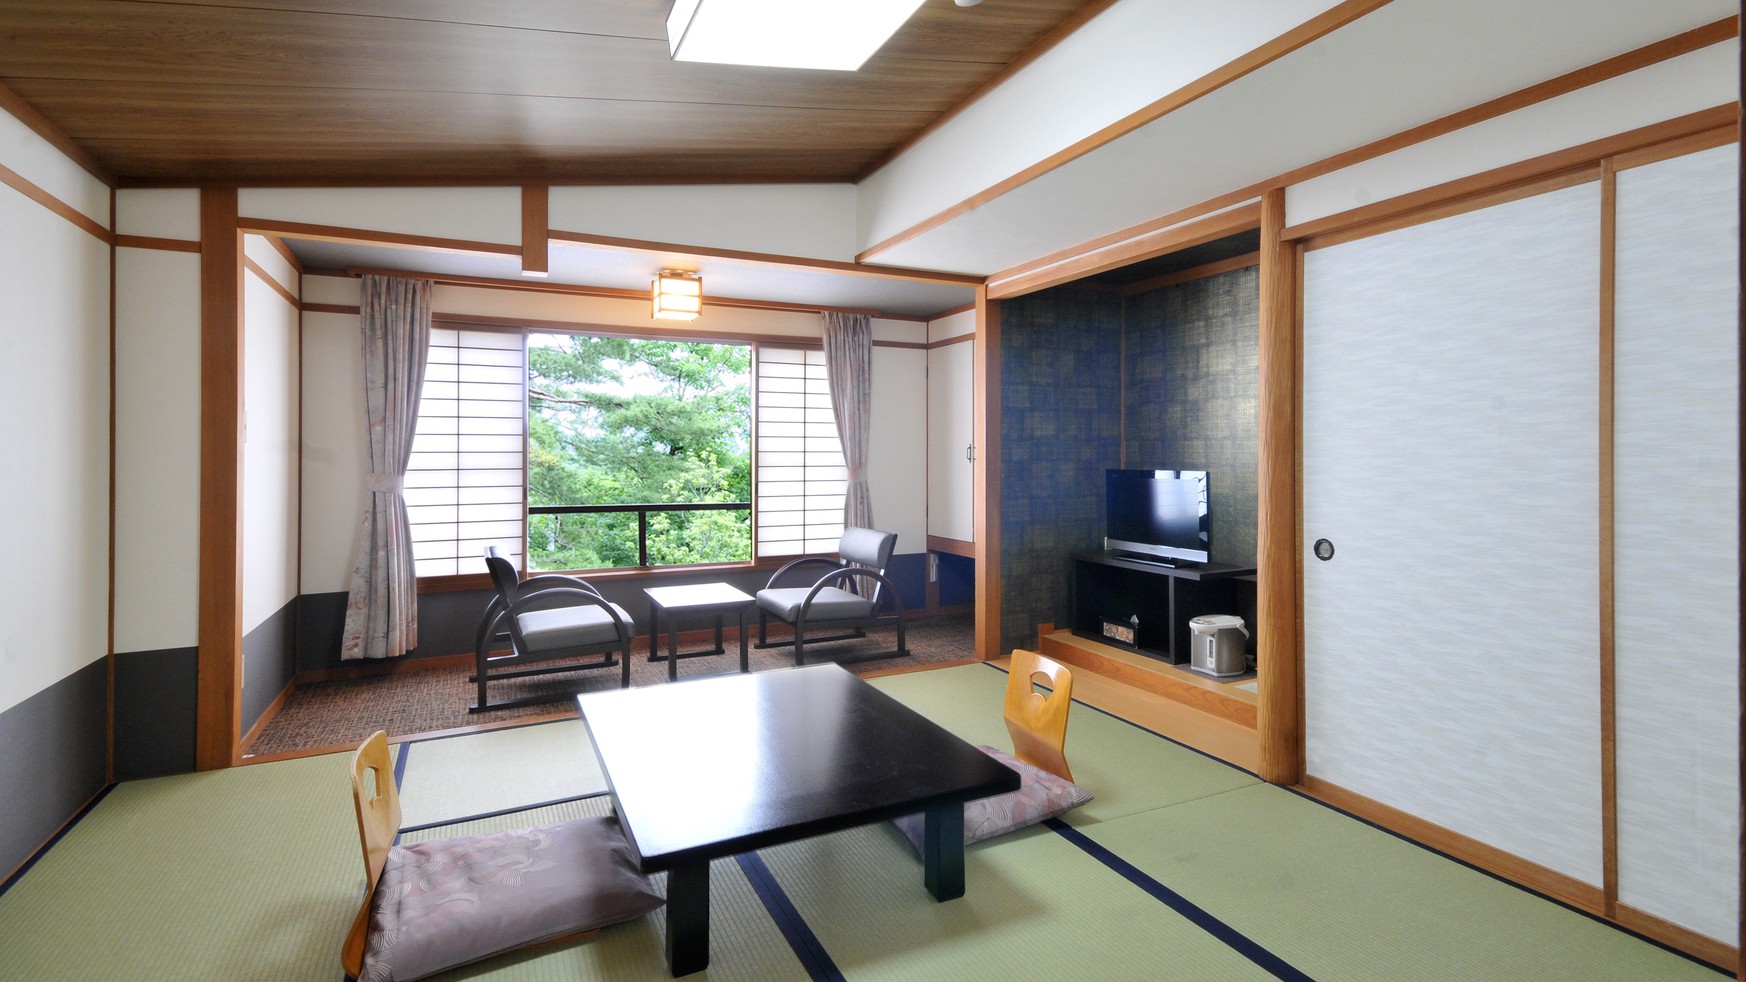 Omachi Onsenkyo Kurobe Kanko Hotel The 3-star Omachi Onsenkyo Kurobe Kanko Hotel offers comfort and convenience whether youre on business or holiday in Nagano. The property offers a wide range of amenities and perks to ensure you have